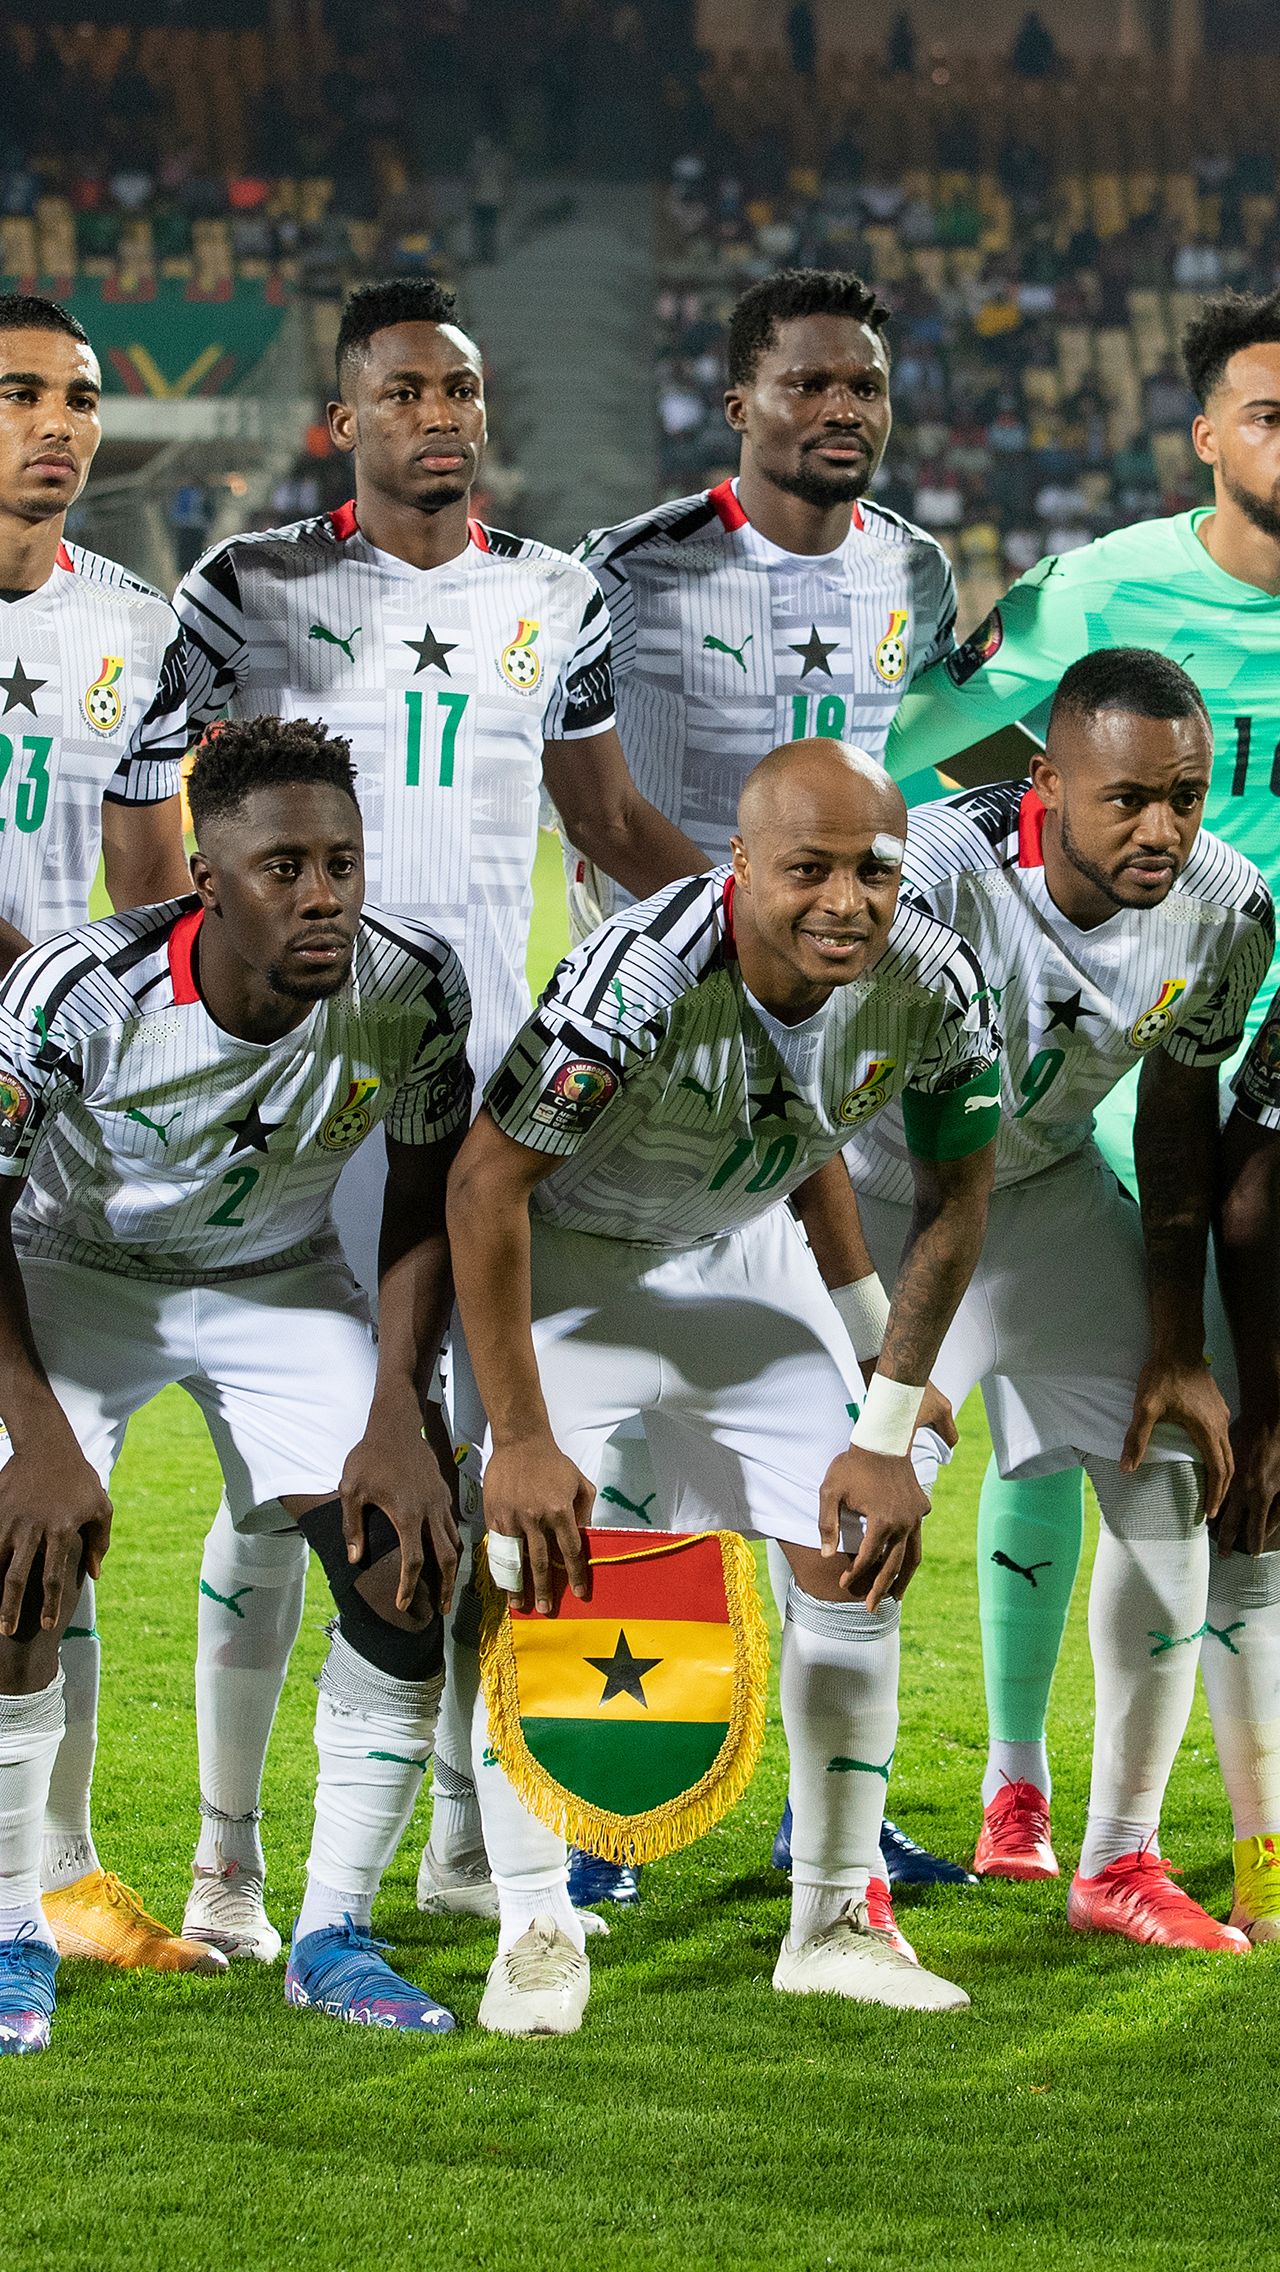 Африка<br/>
🇬🇭🇲🇦🇸🇳🇨🇲🇹🇳<br/>
